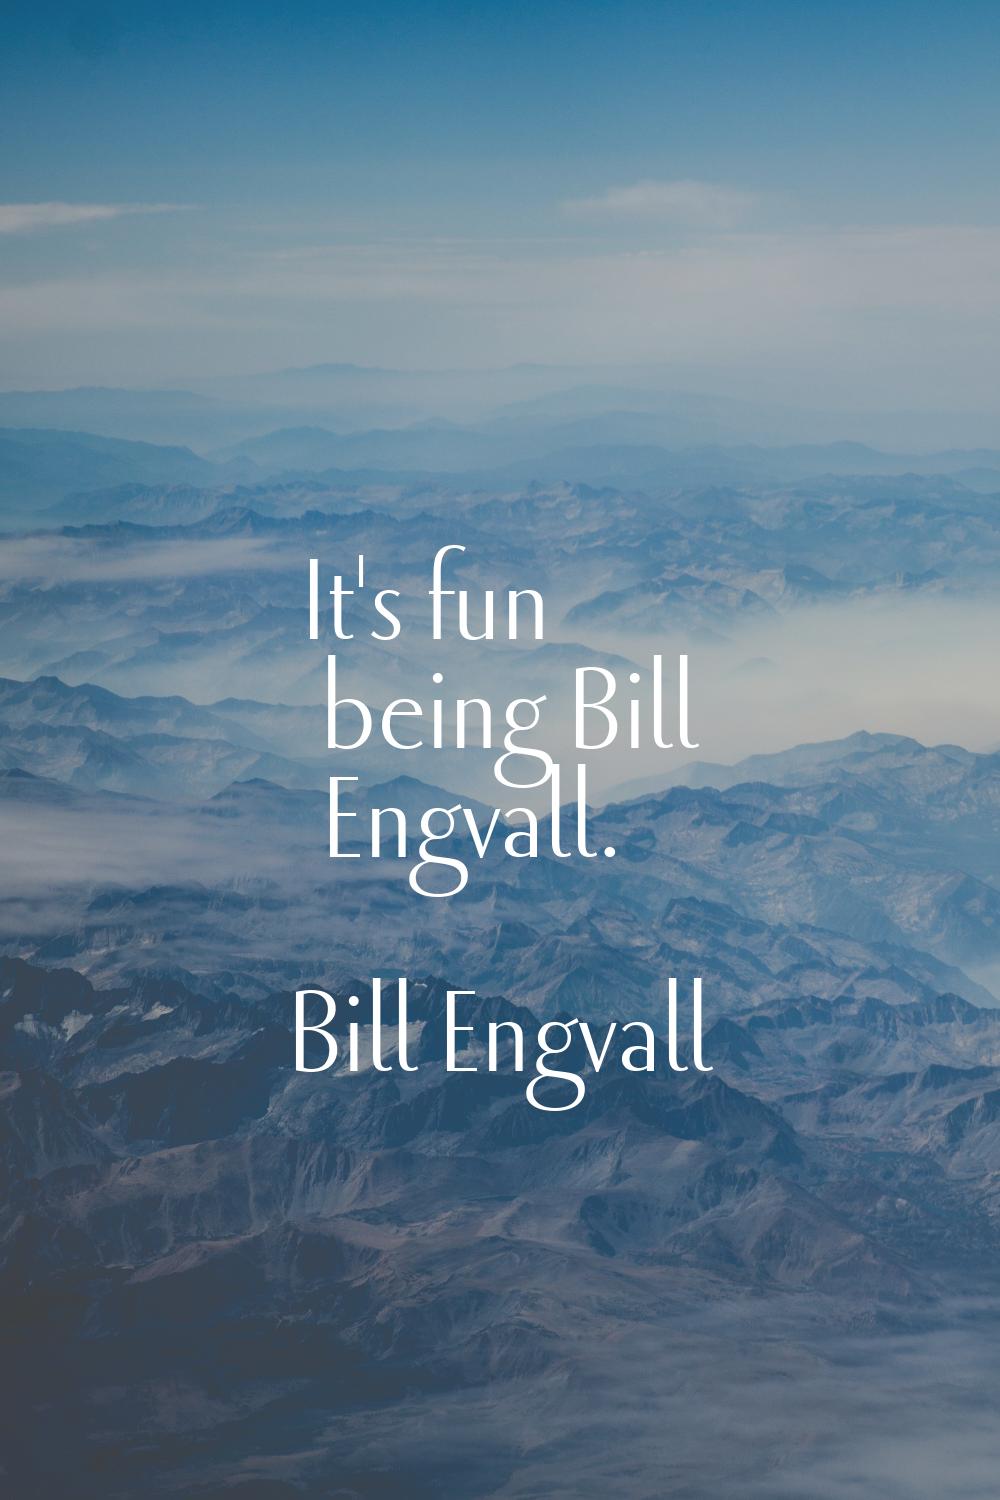 It's fun being Bill Engvall.